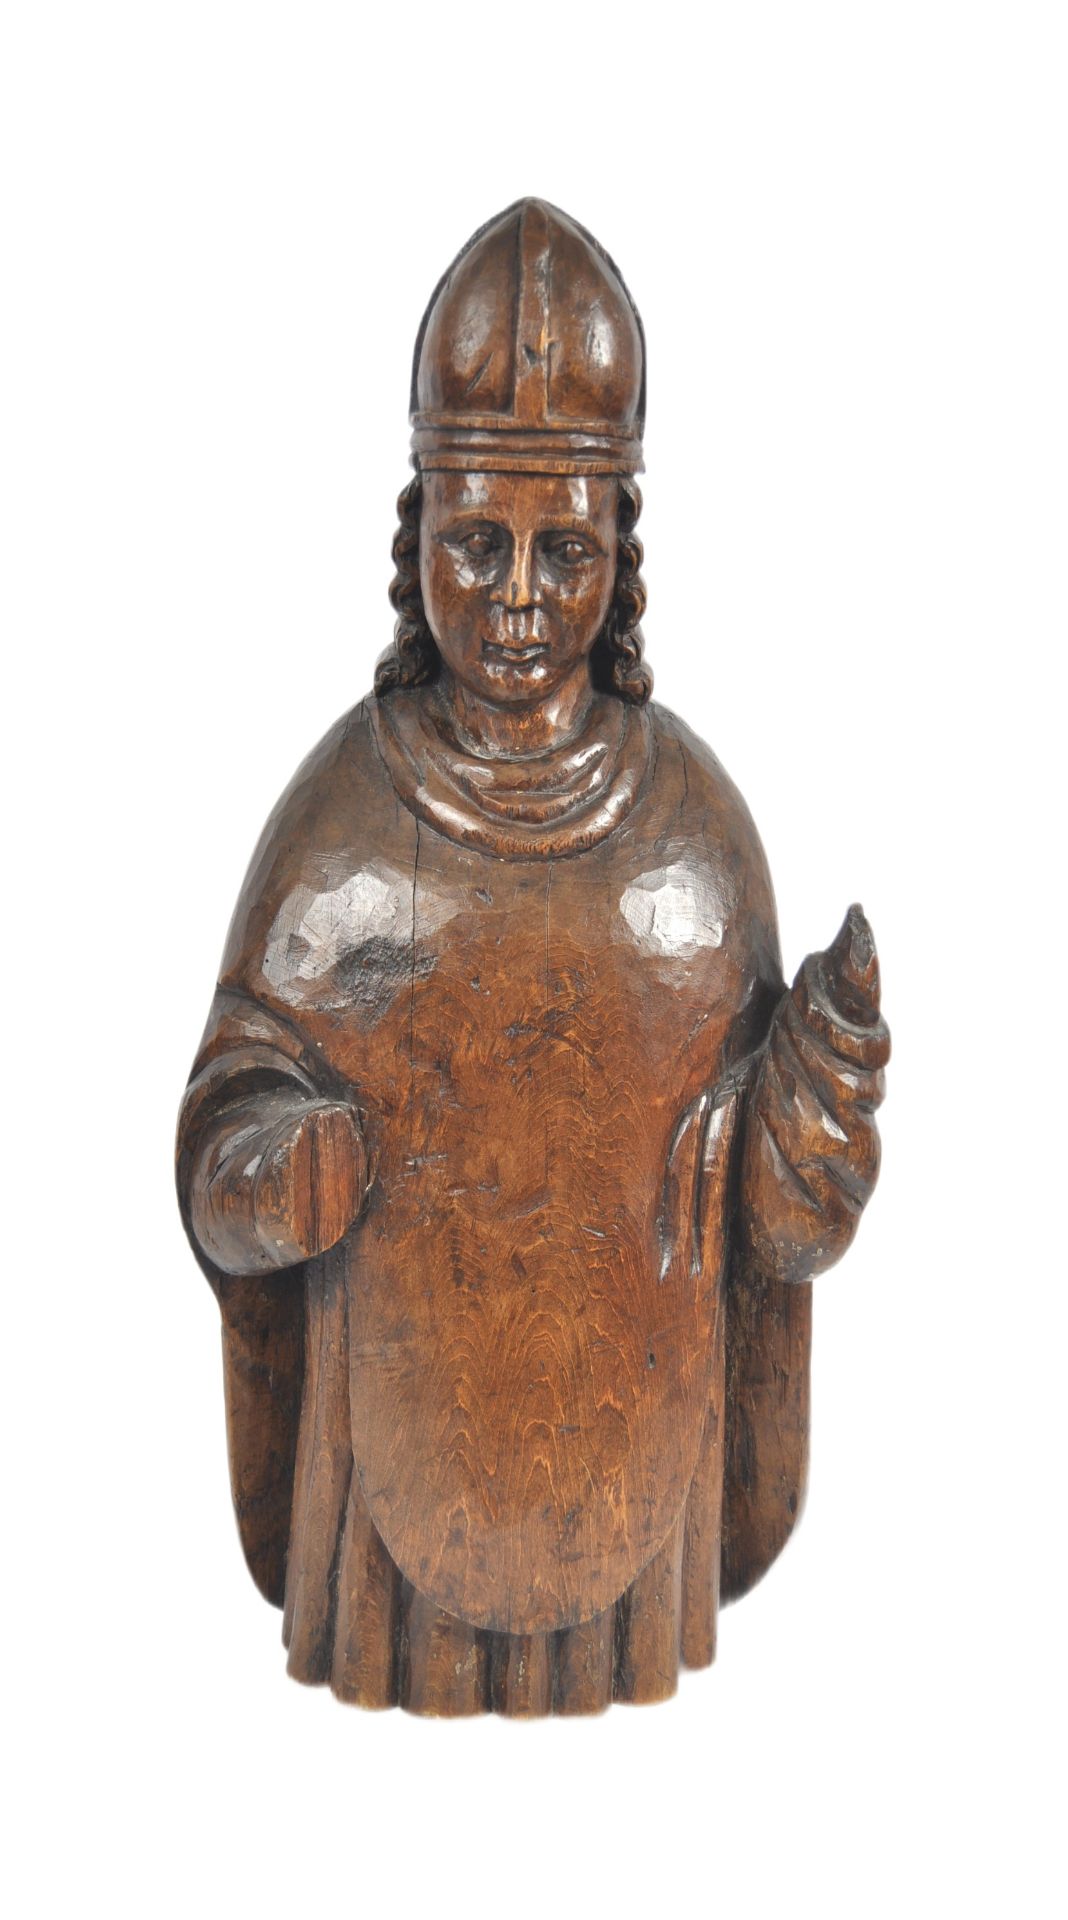 19TH CENTURY OAK CARVED RELGIOUS FIGURE